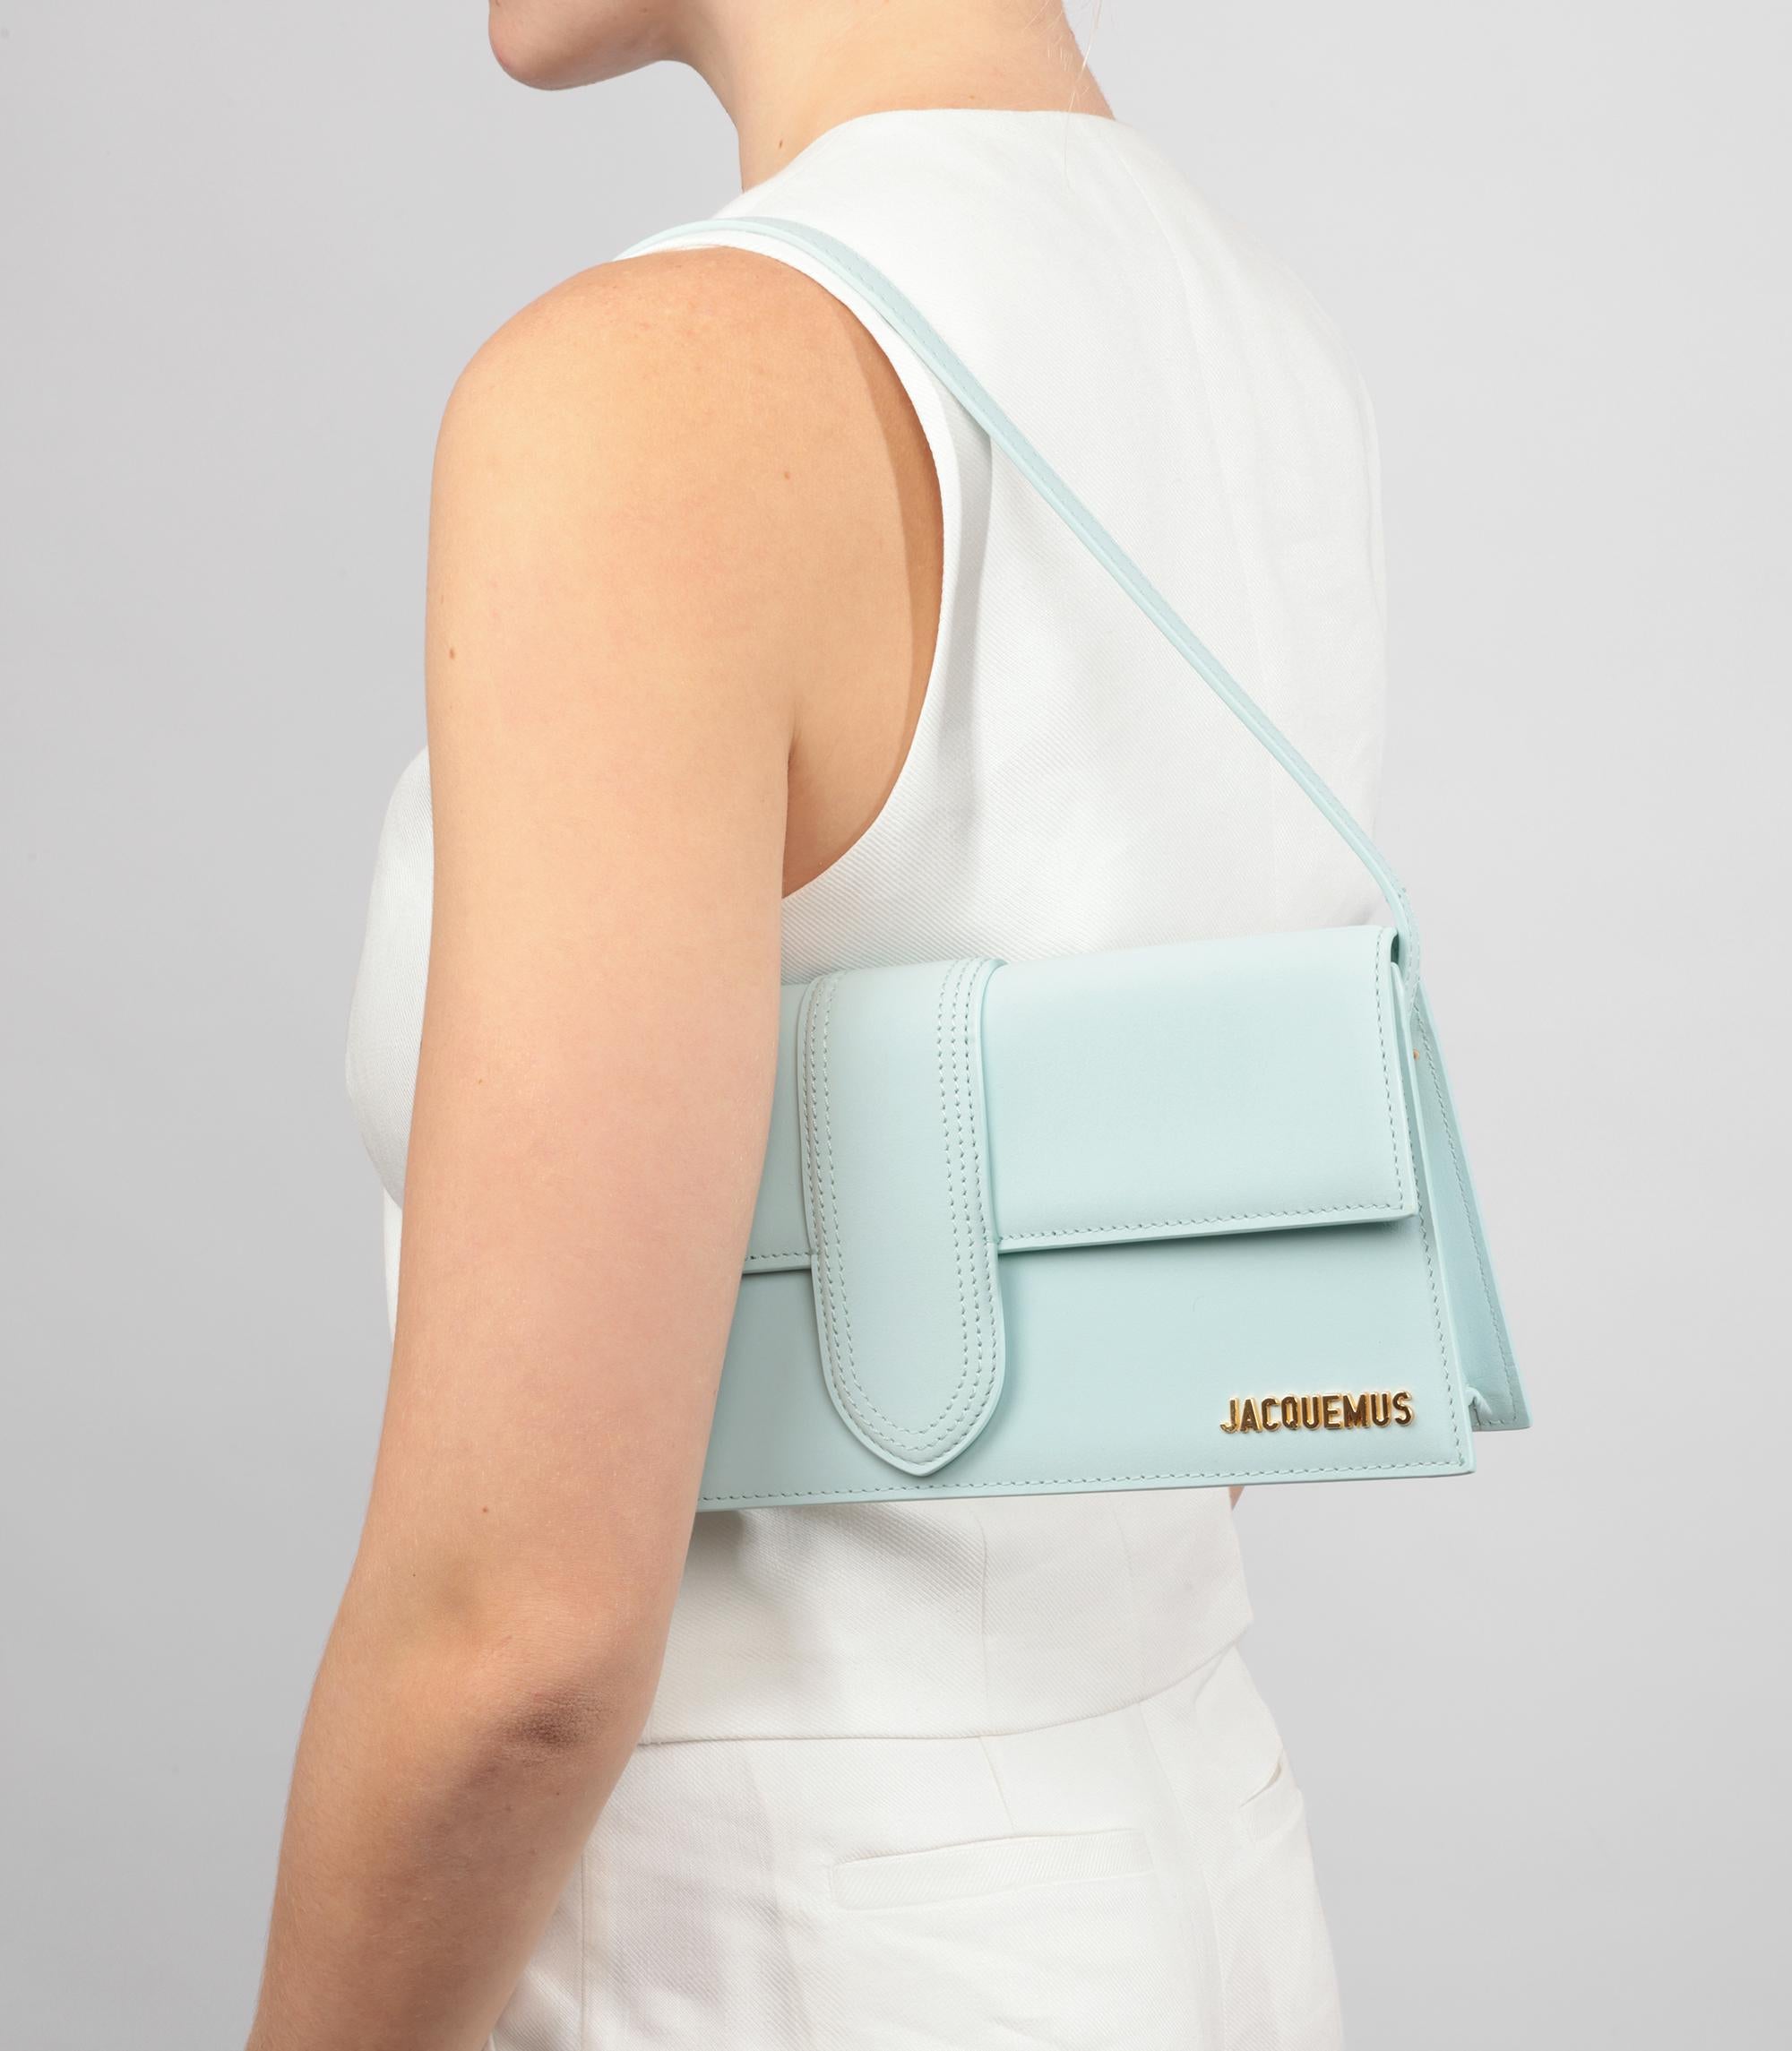 Jacquemus Pale Blue Smooth Calfskin Leather Le Bambino Long

Brand- Jacquemus
Model- Le Bambino Long
Product Type- Shoulder, Top Handle
Age- Circa 2023
Colour- Pale Blue
Hardware- Gold
Material(s)- Calfskin Leather

Height- 13.5cm
Width- 28cm
Depth-